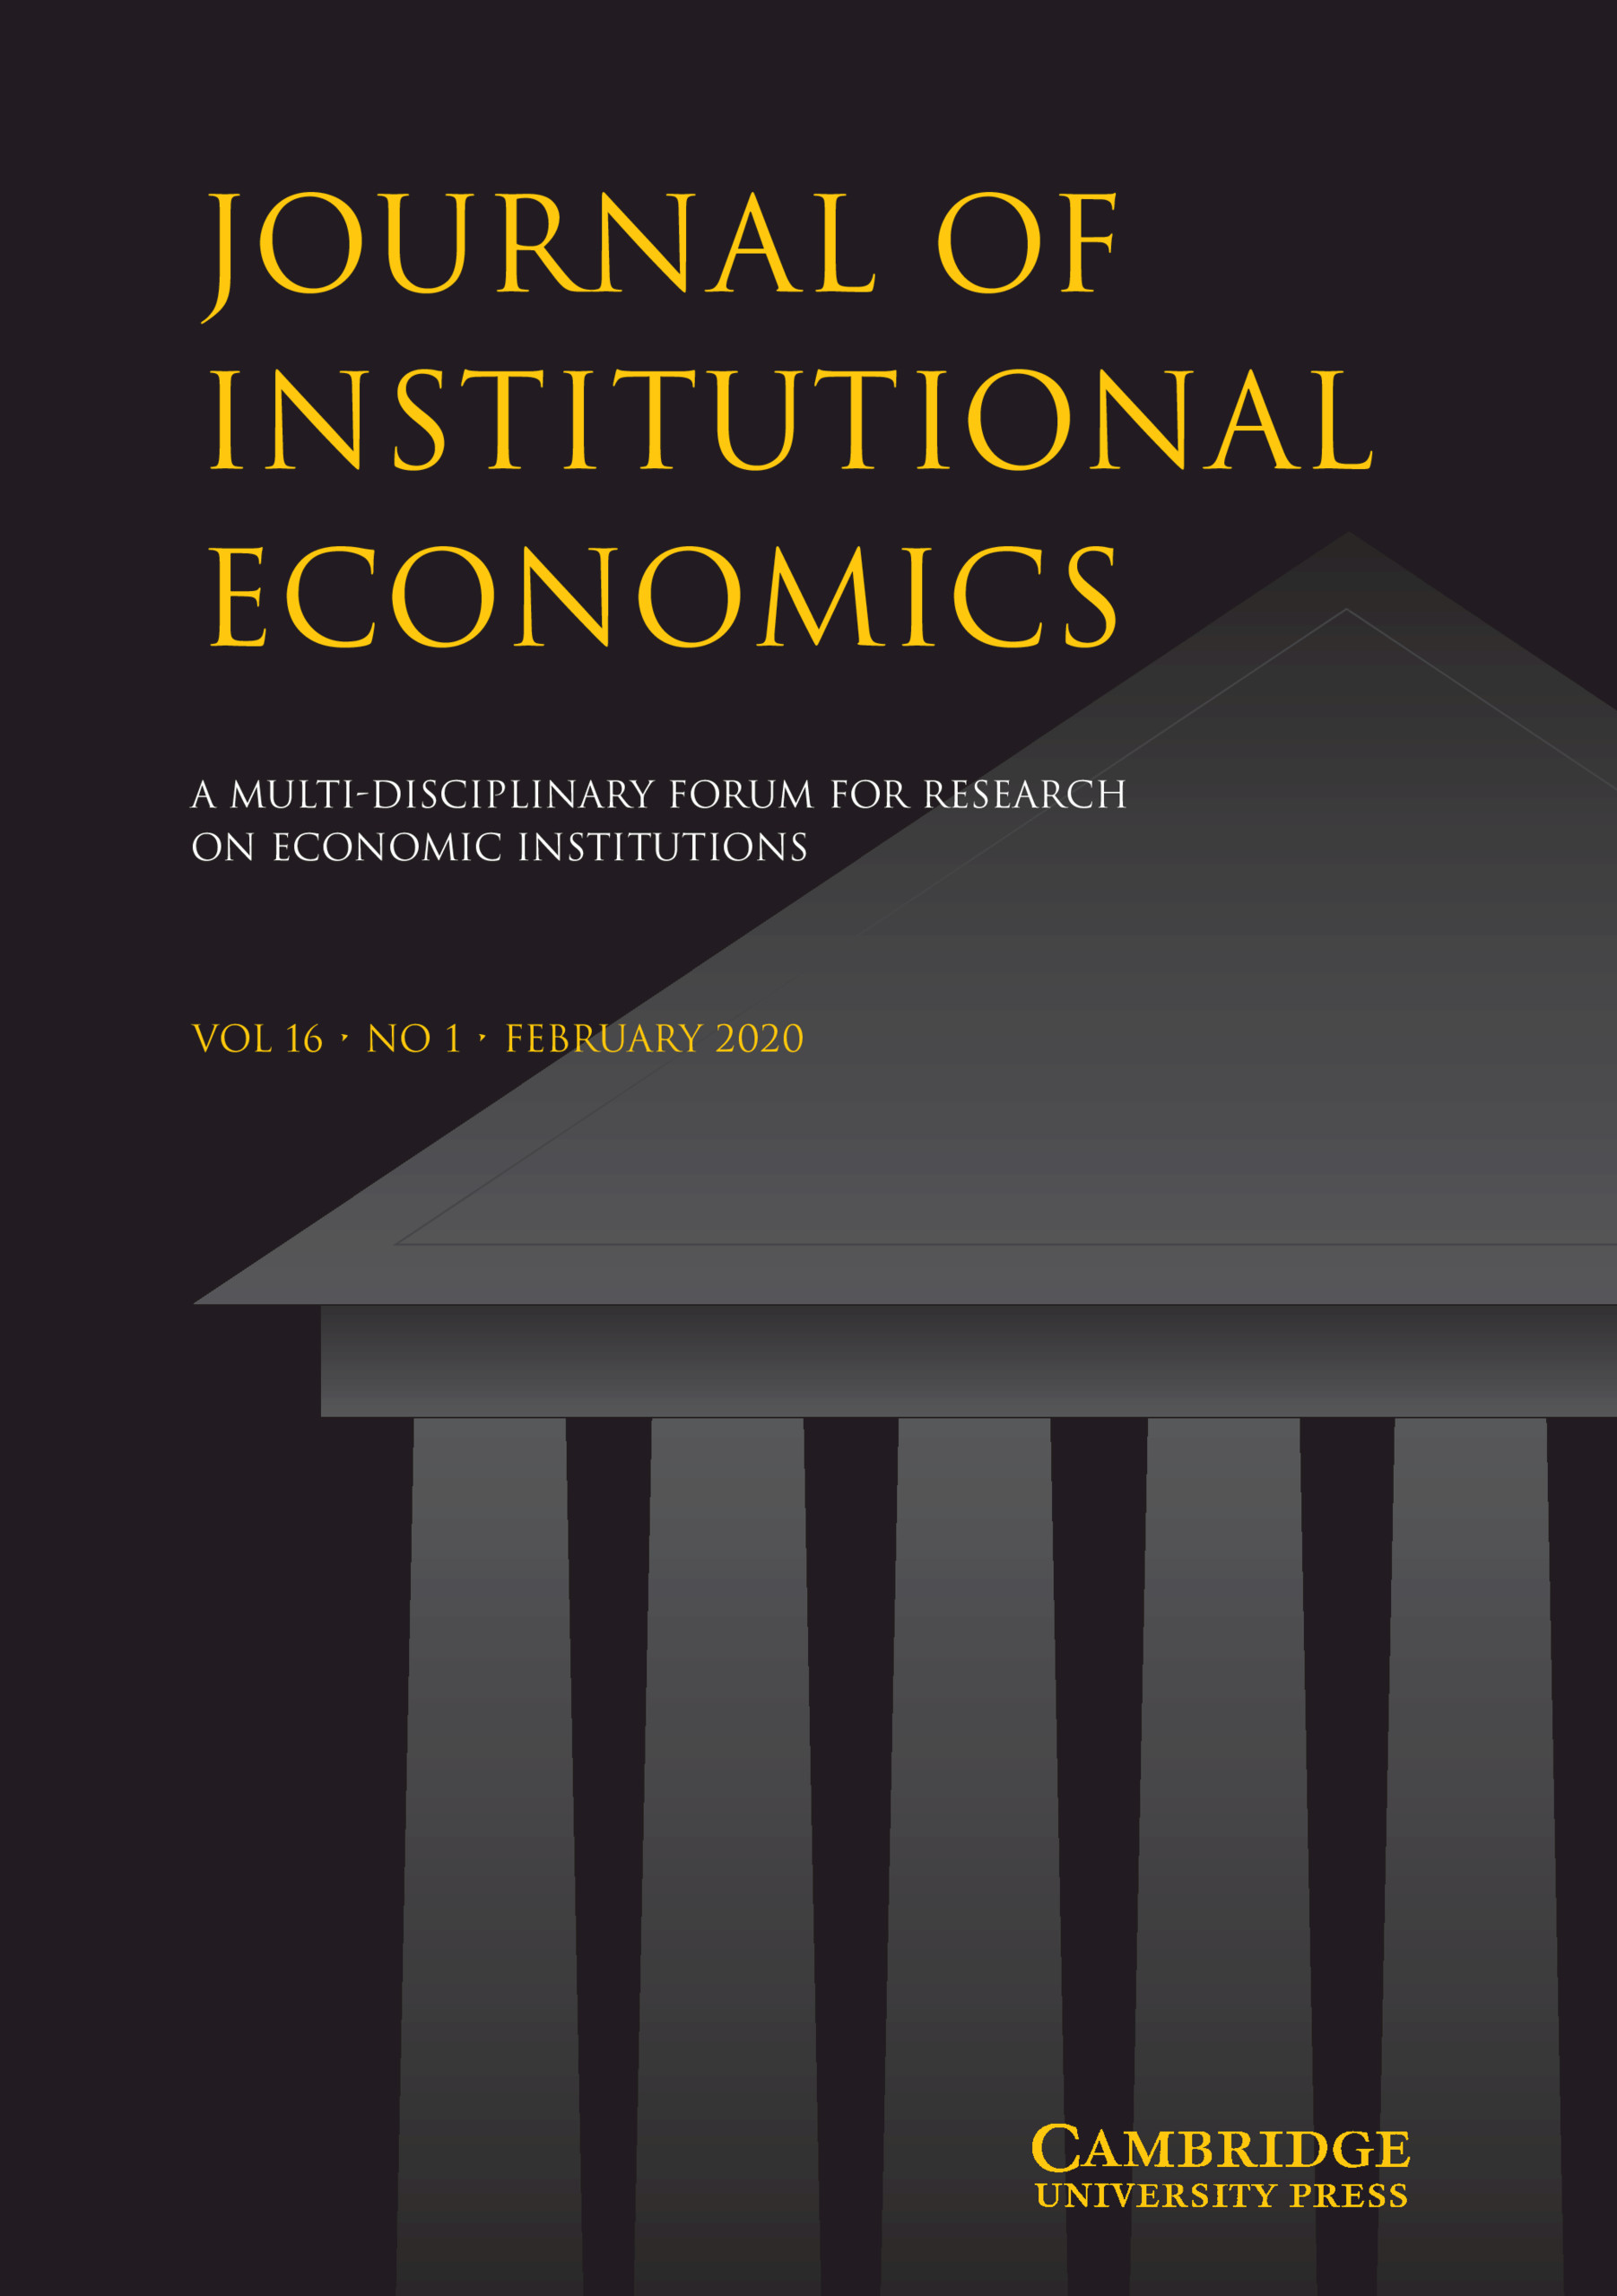 Economics Journal Meaning - Management And Leadership